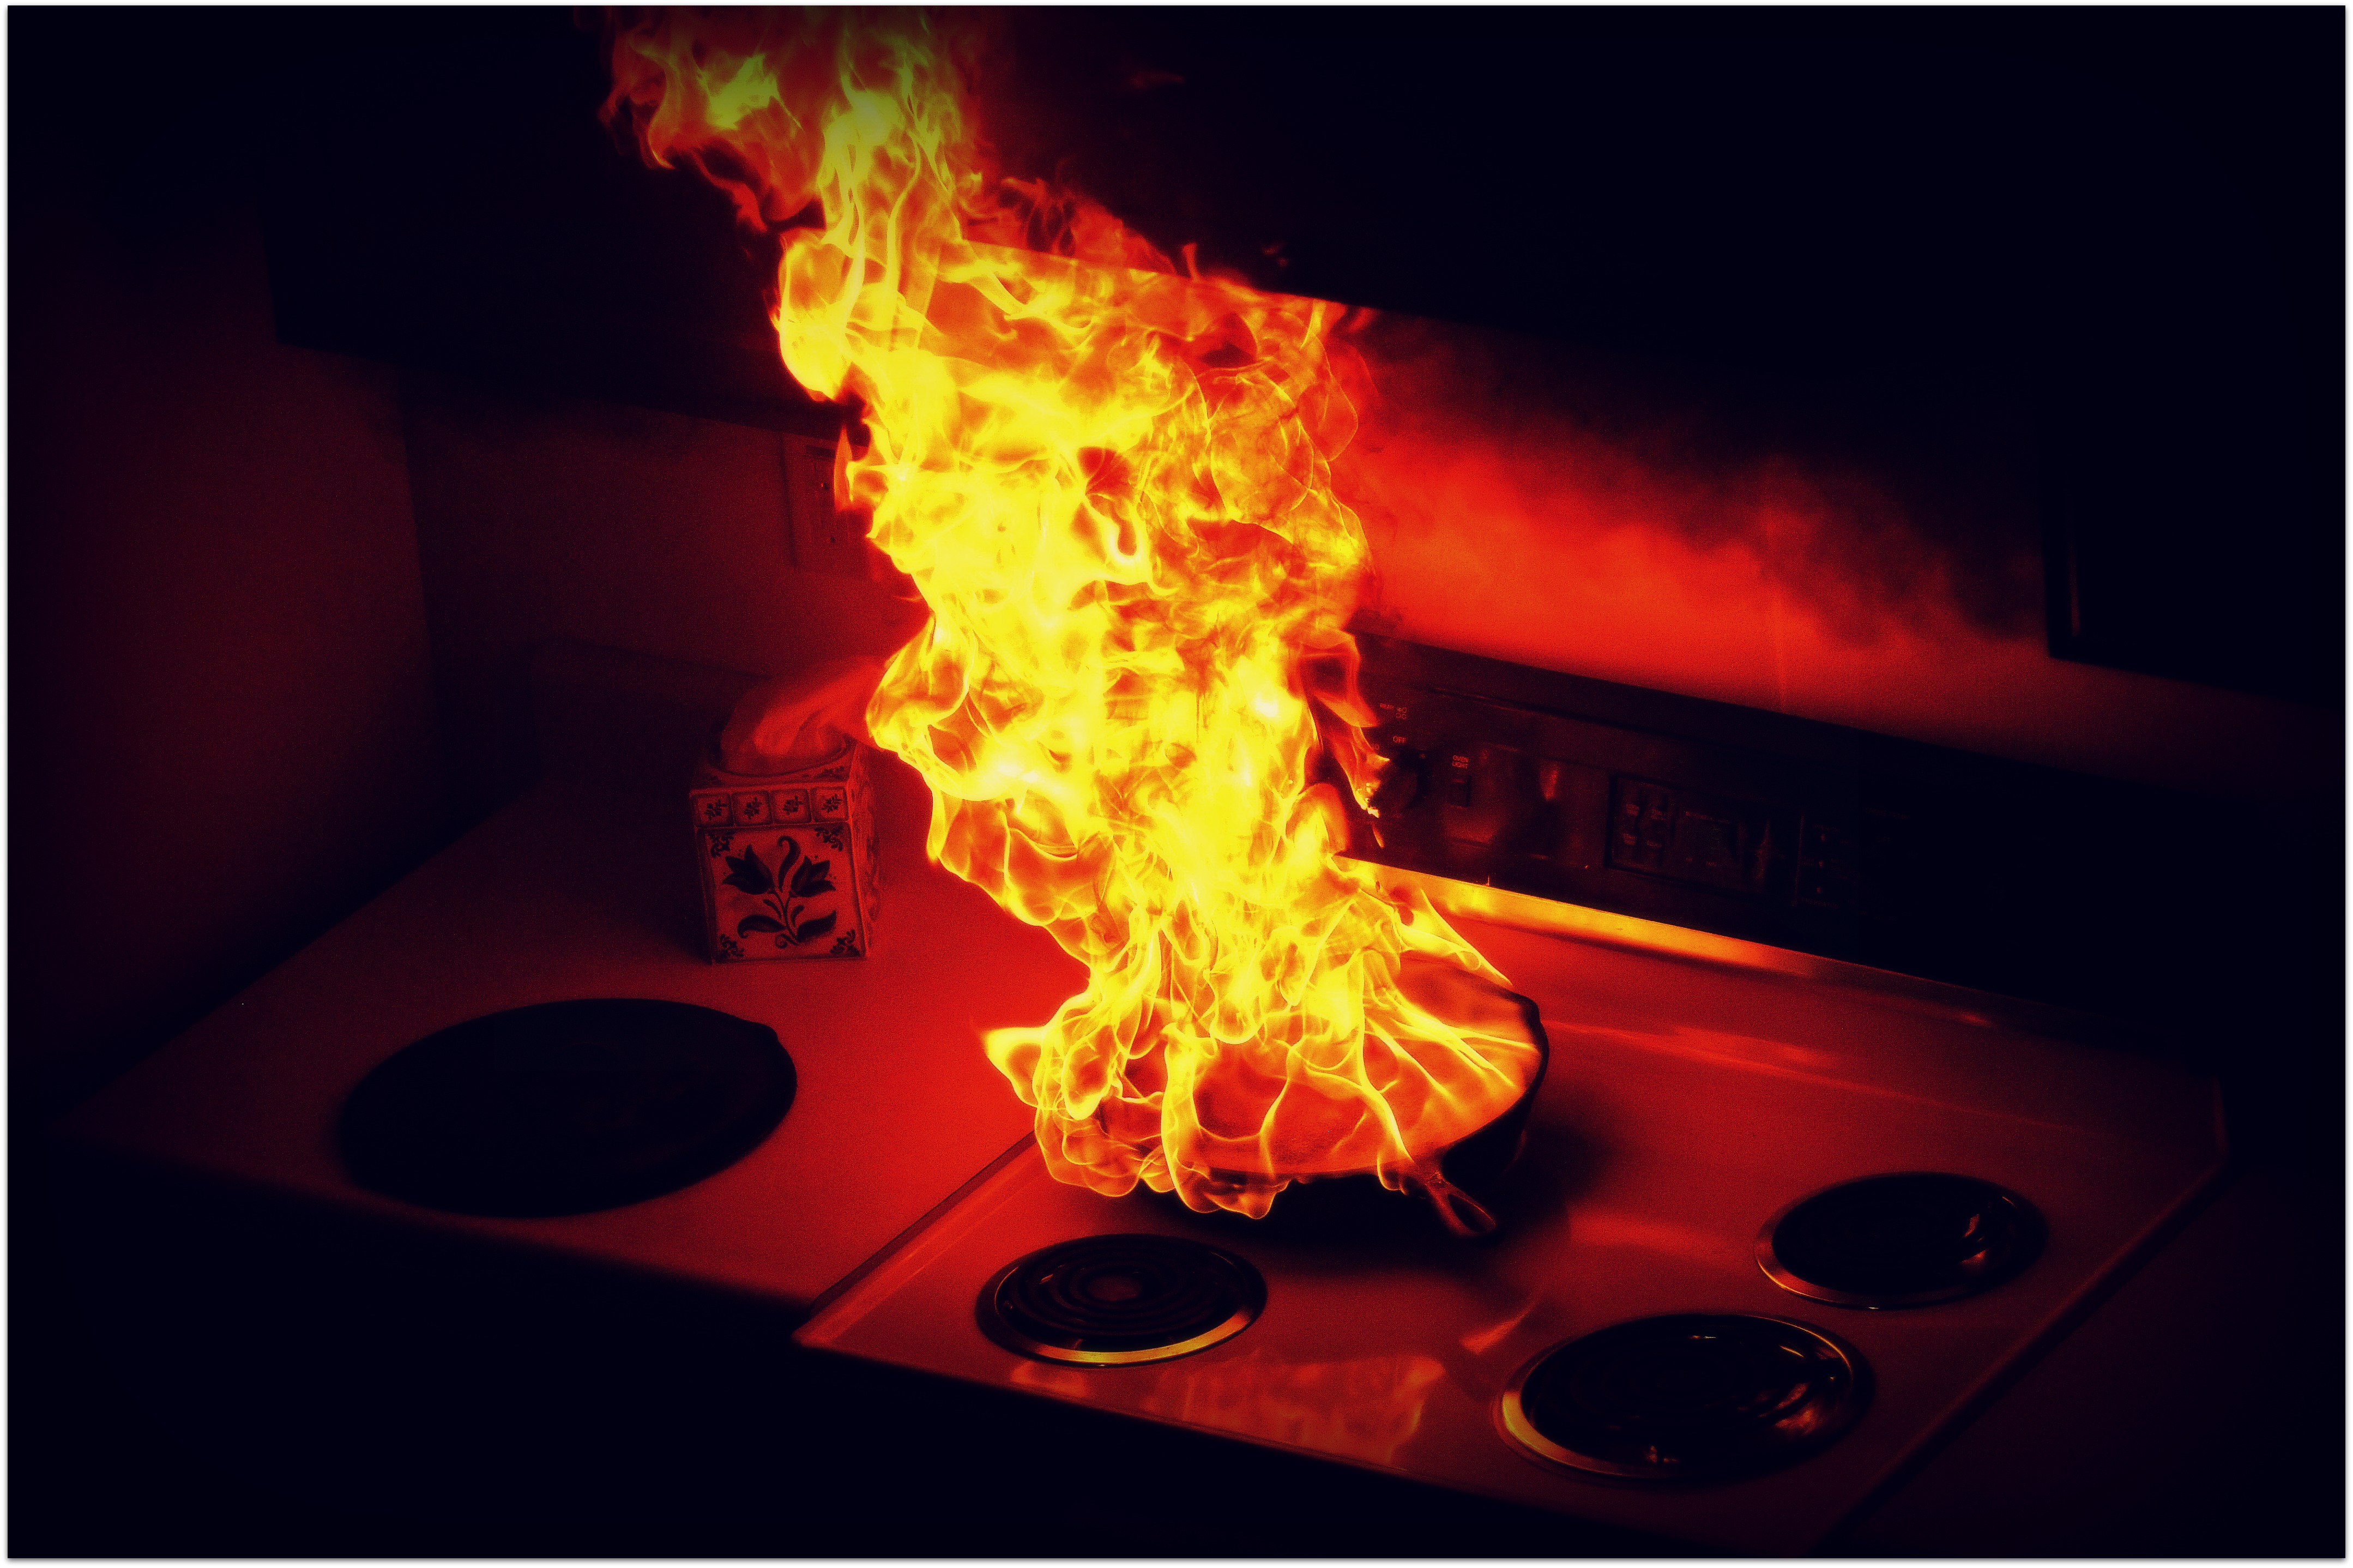 Kitchen fires — a student rite of passage?